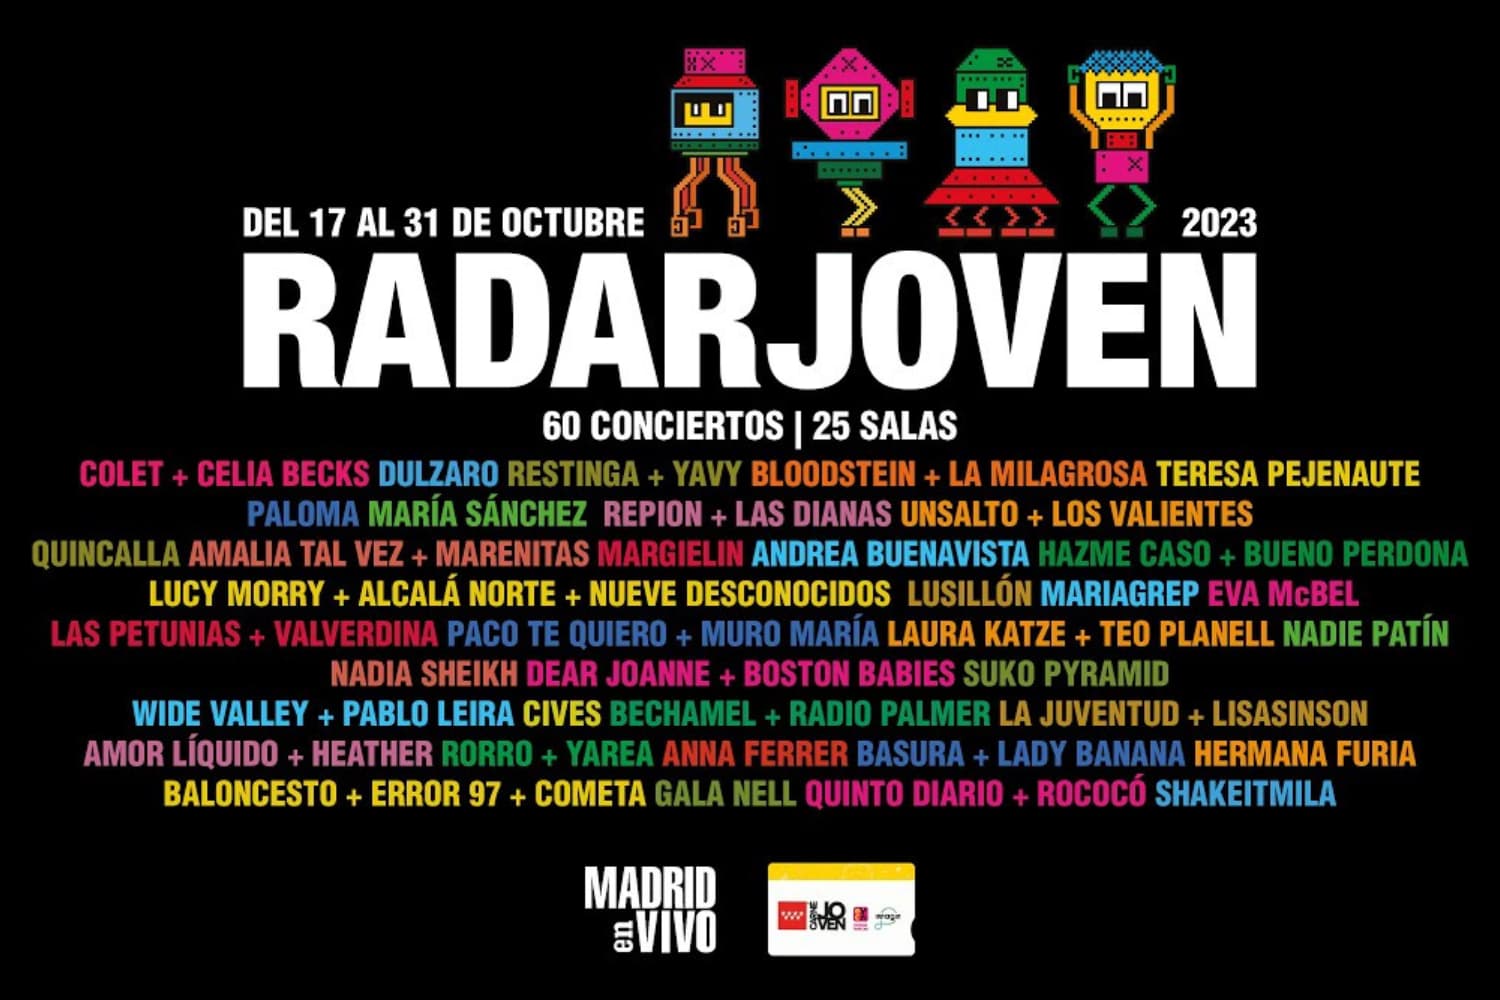 Radar Joven is back in its second edition with 60 concerts of artists and emerging music